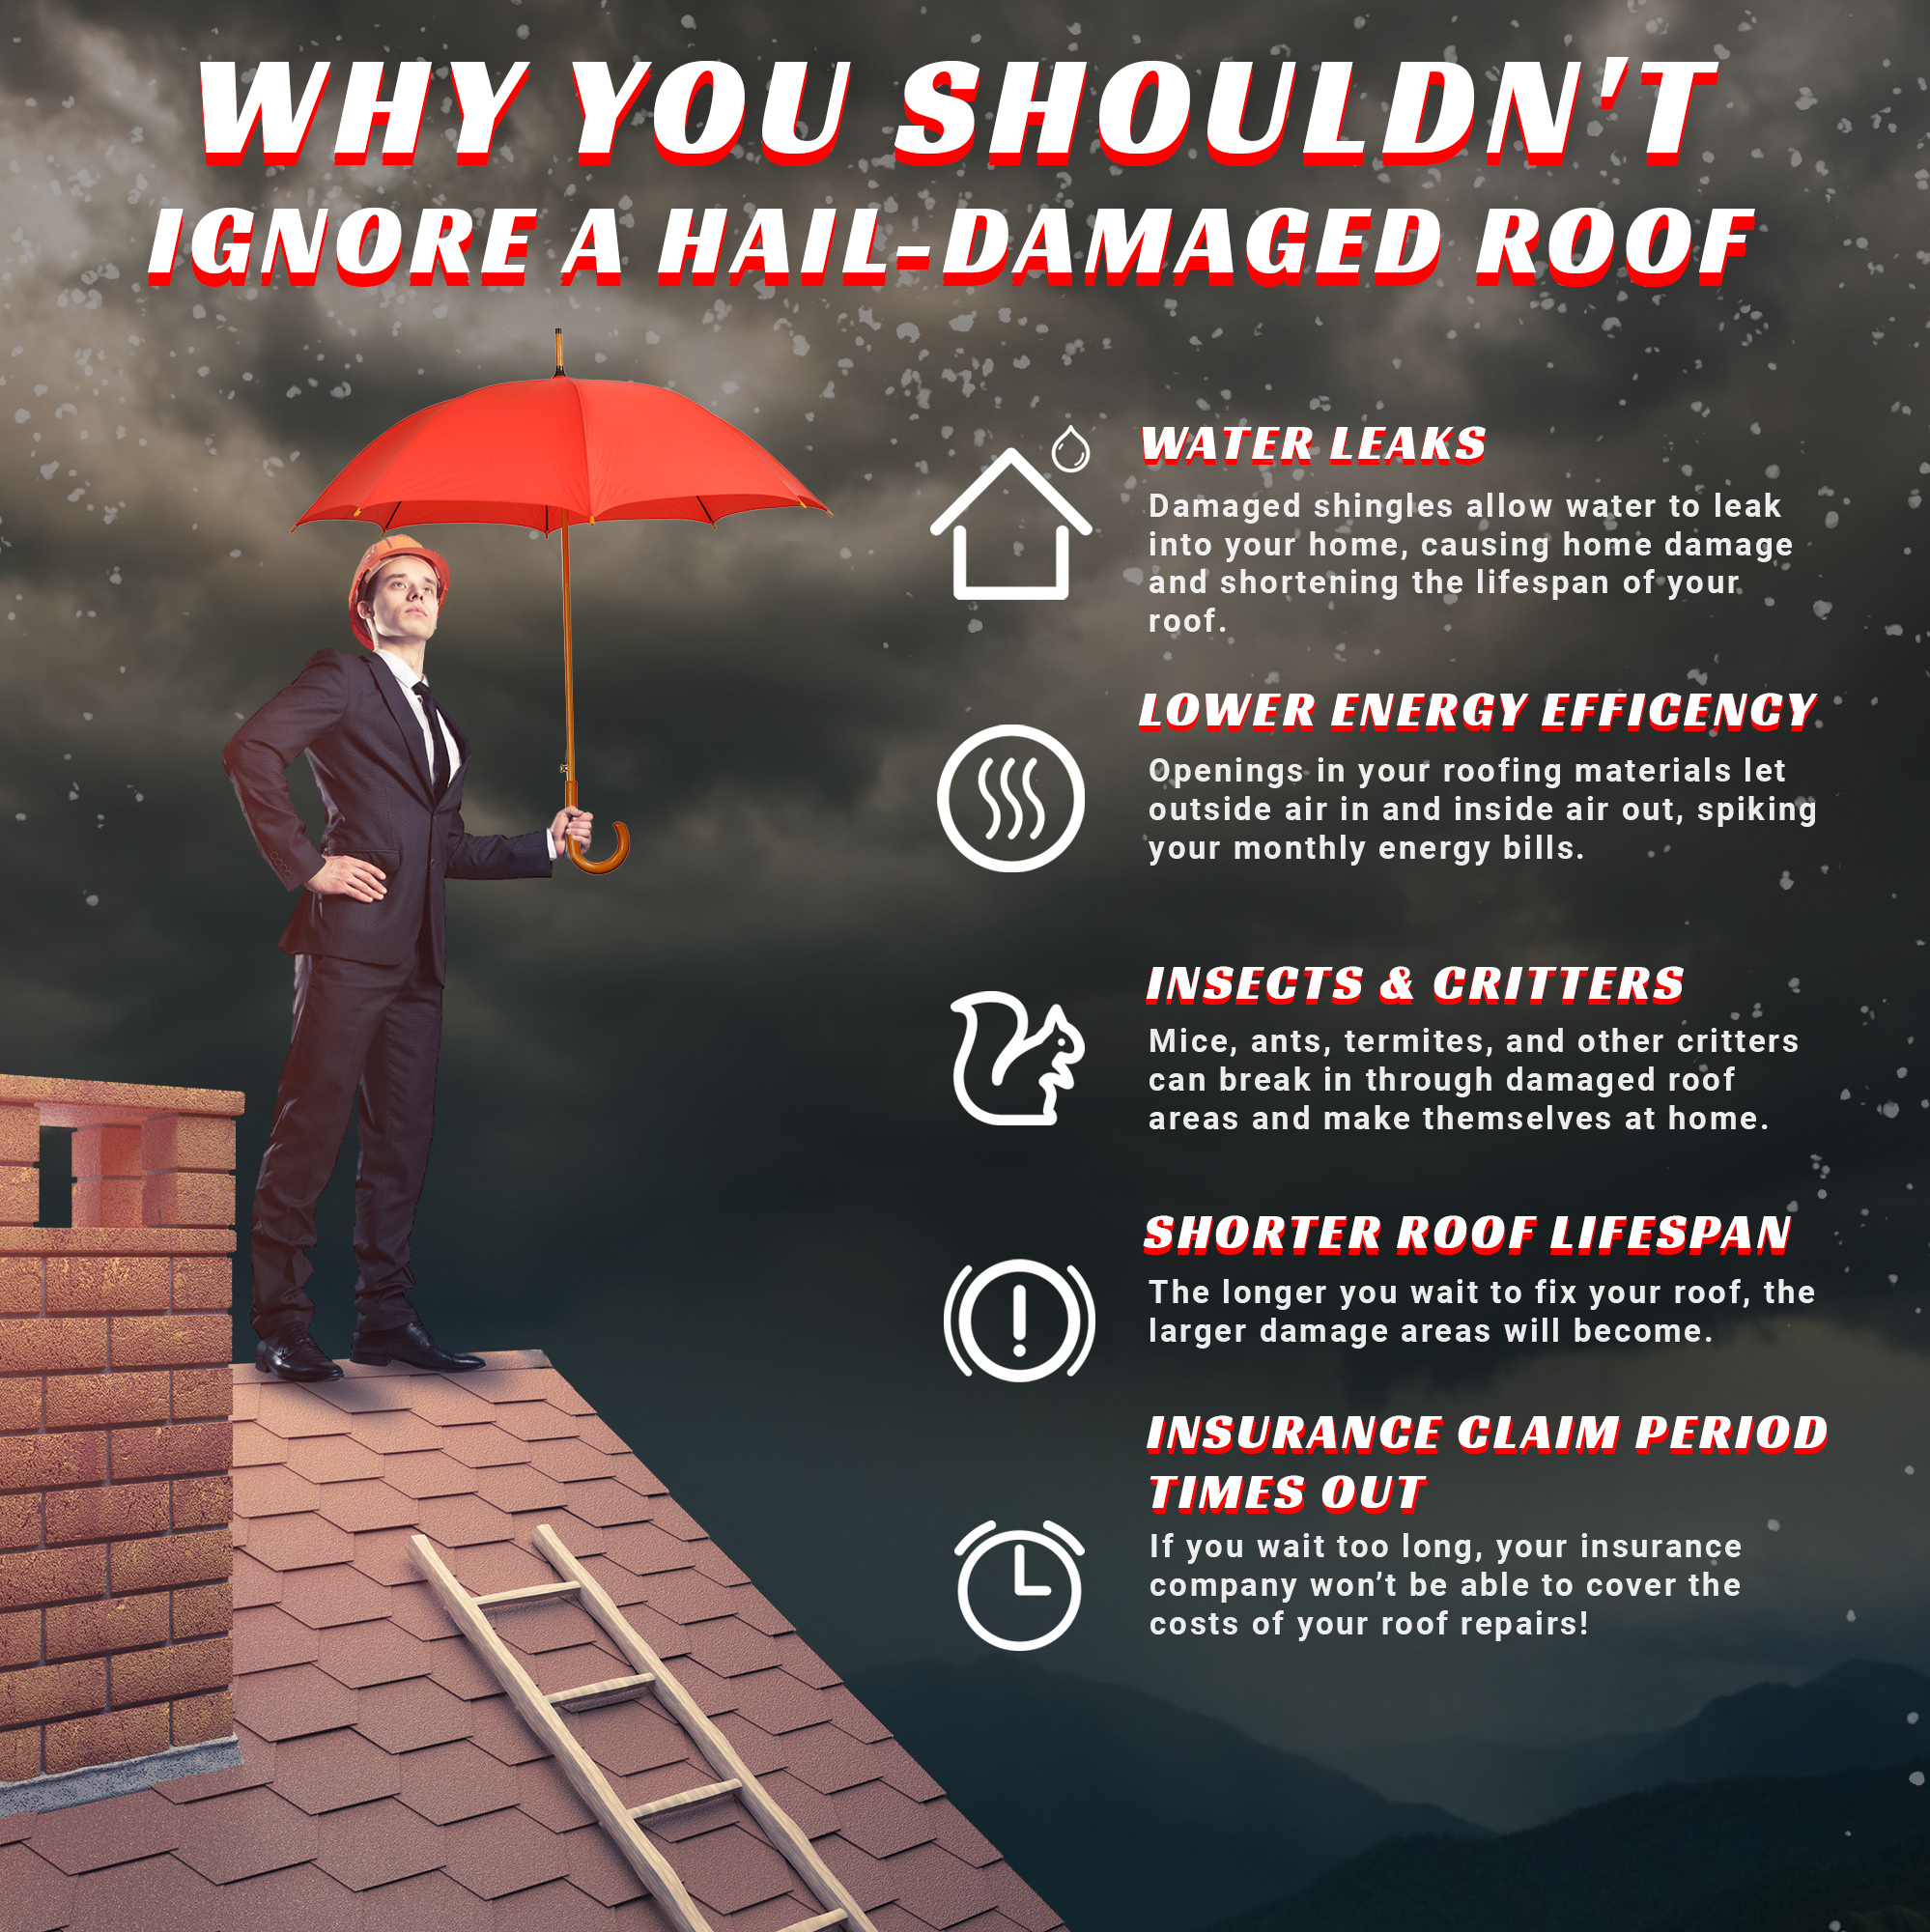 Why You Shouldn't Ignore A Hail-Damaged Roof Infographic